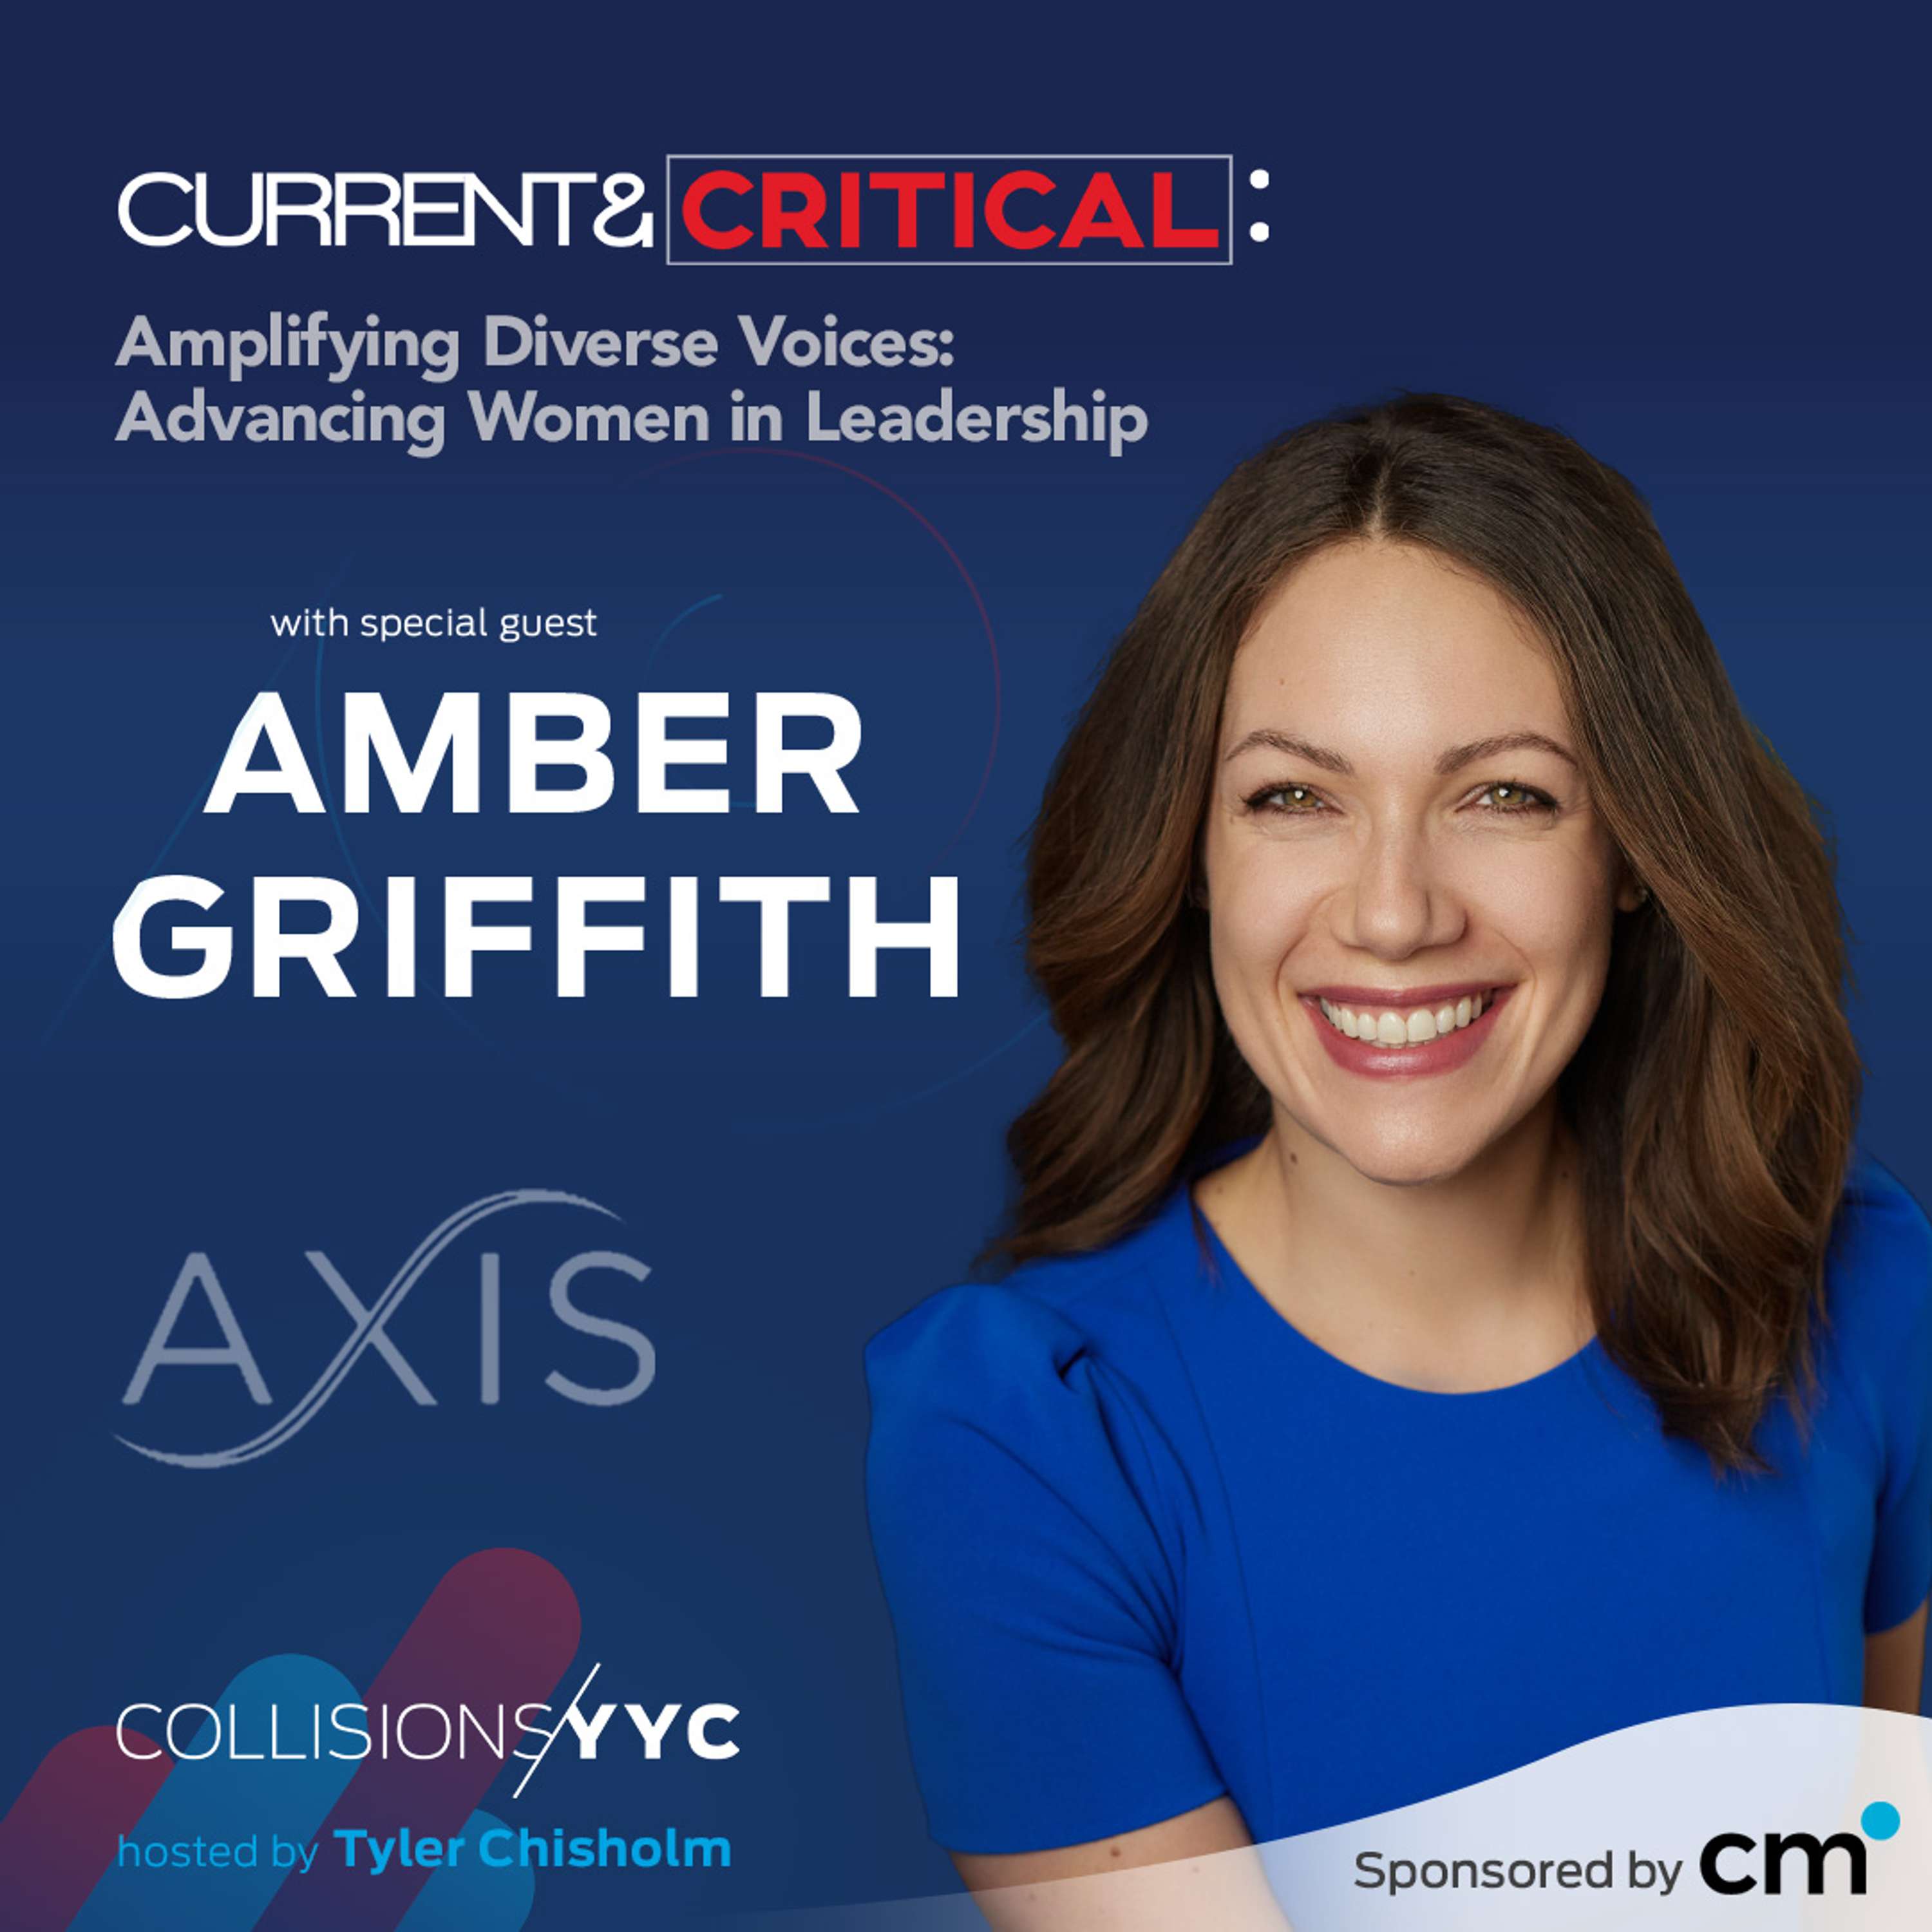 Amber Griffith, Amplifying Diverse Voices: Advancing Women in Leadership